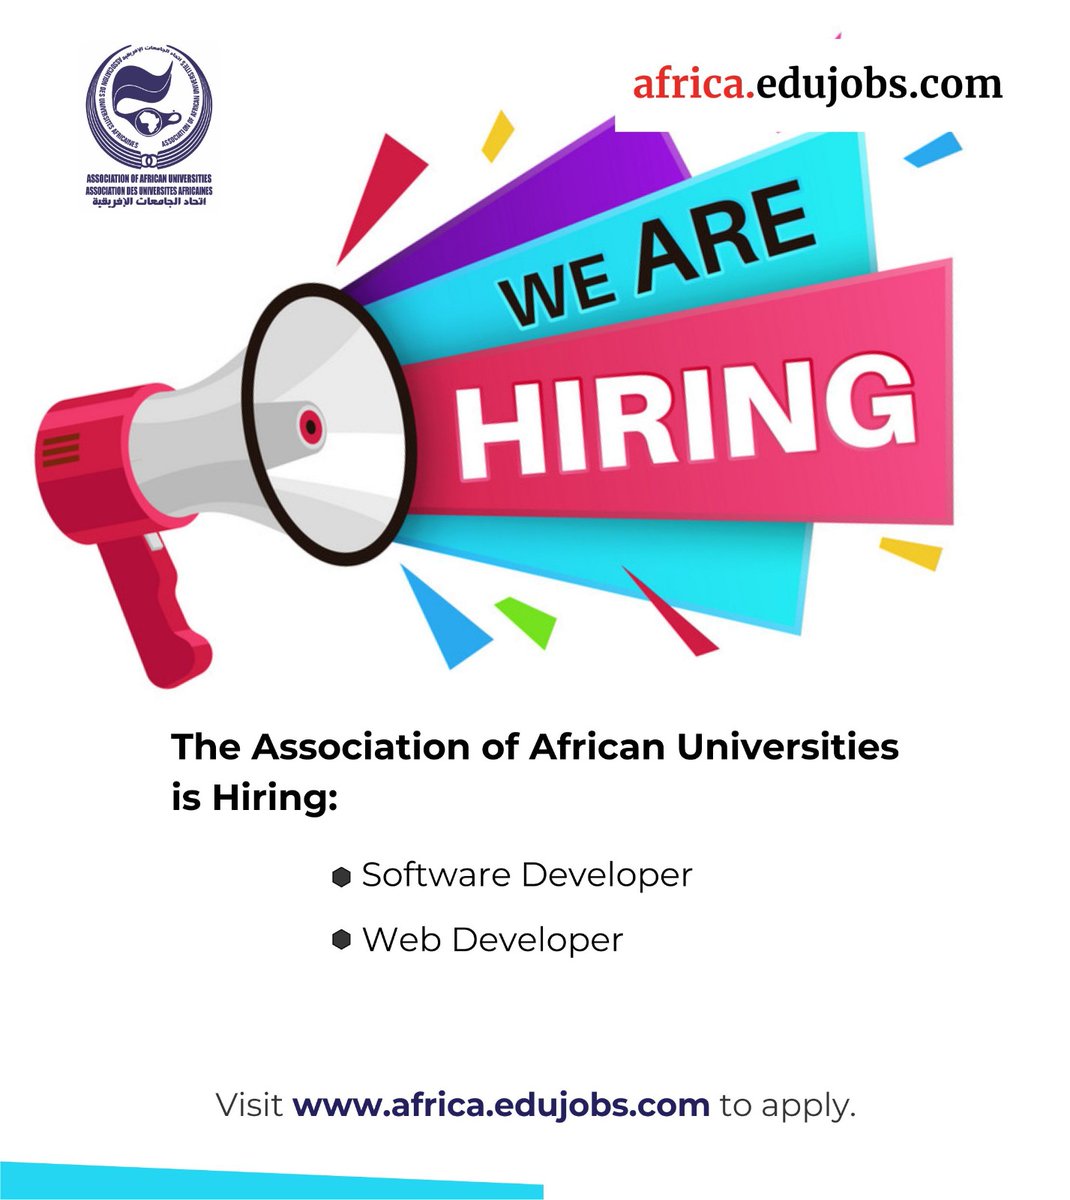 We're hiring at #AAU! Are you a skilled Web Developer with experience in #webdevelopment, #graphicdesign, and proficiency in #JavaScript, #HTML, #CSS, and #WordPress? Or perhaps you're a Software Developer passionate about #softwaredevelopment with expertise in #PHP, #Laravel,…